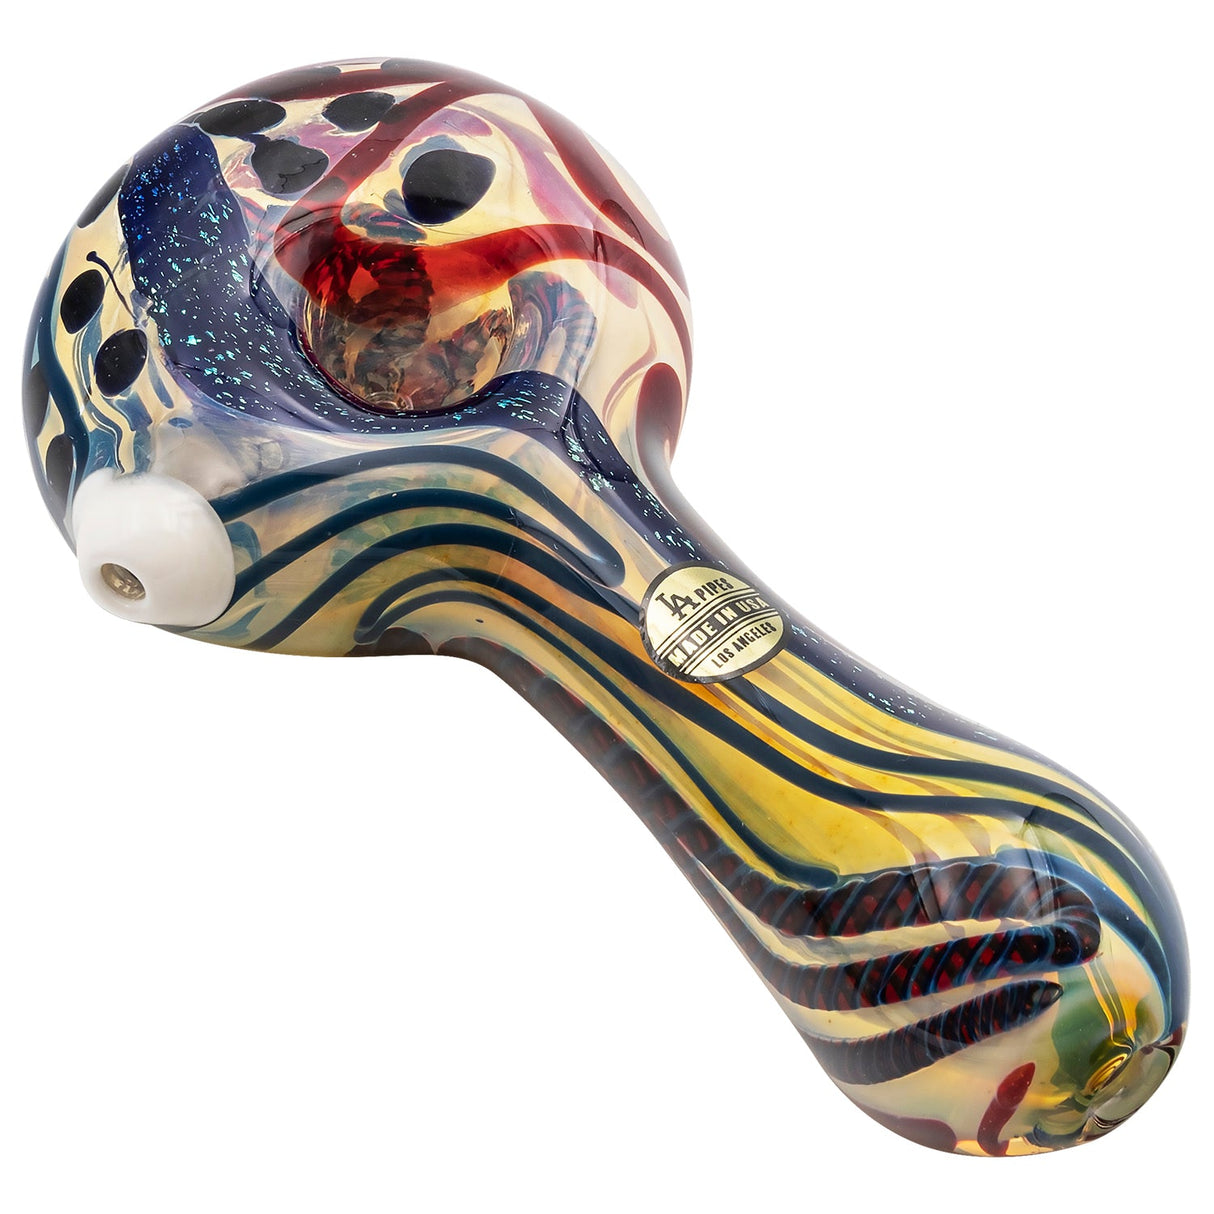 LA Pipes "Pancake" Dichroic Spoon Glass Pipe with Color-Changing Design, Side View